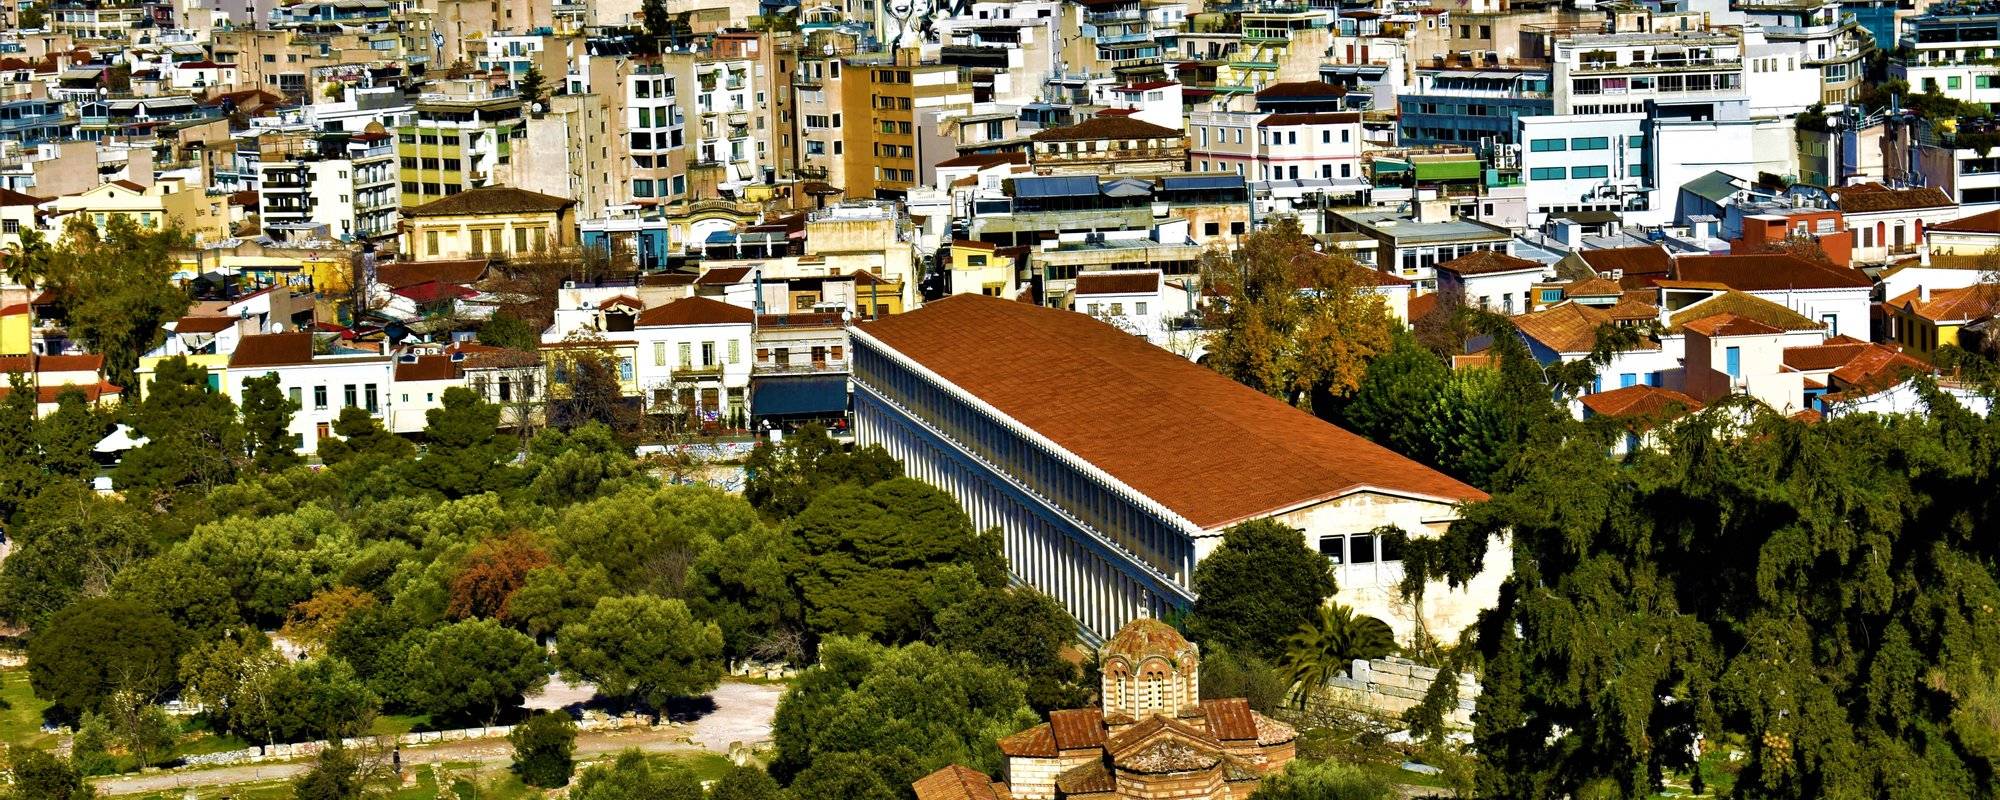 The historical center of Athens.